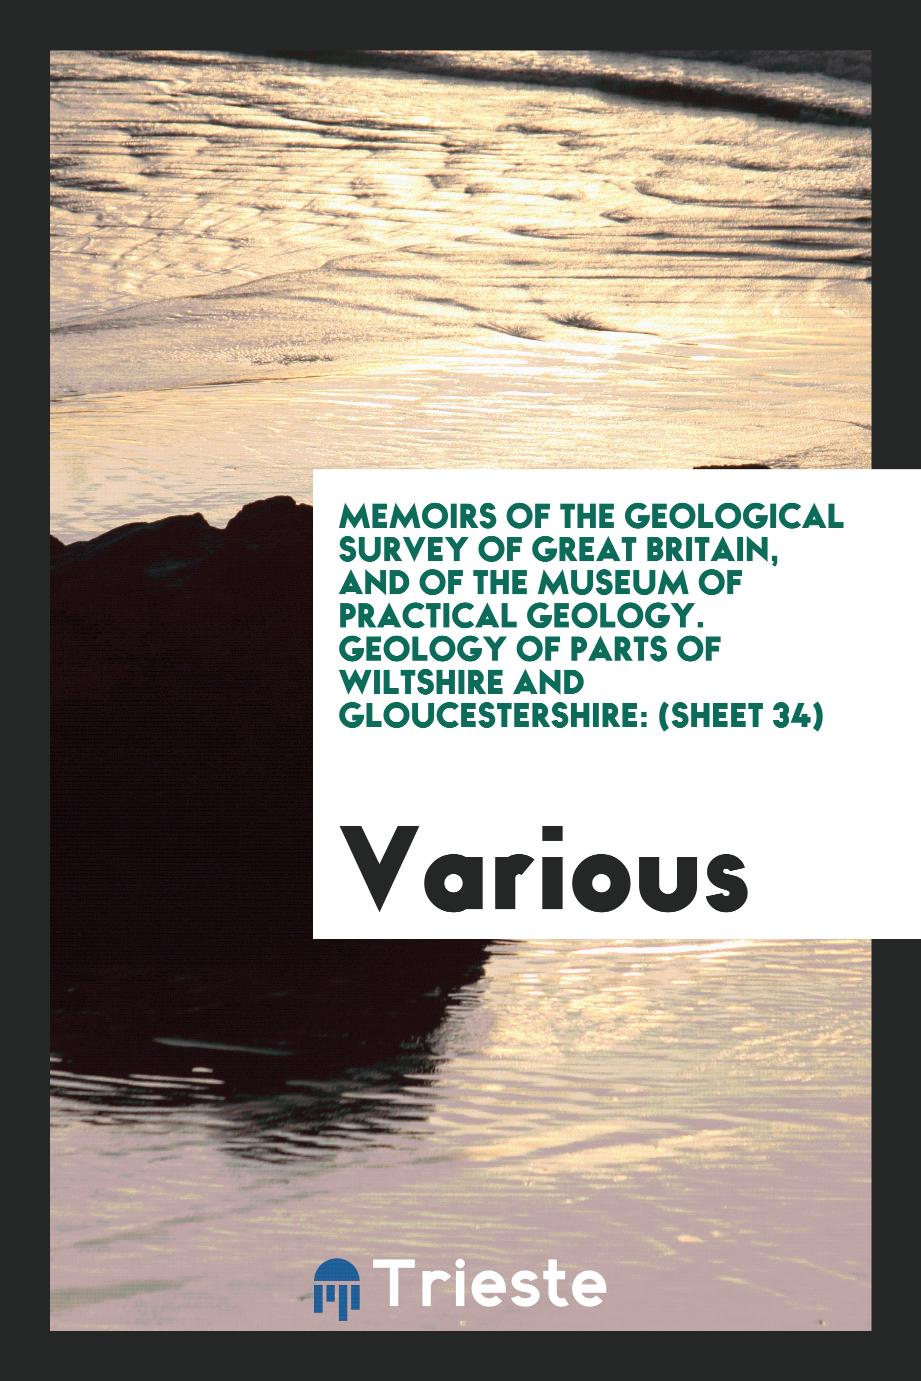 Memoirs of the Geological Survey of Great Britain, and of the Museum of Practical Geology. Geology of Parts of Wiltshire and Gloucestershire: (Sheet 34)